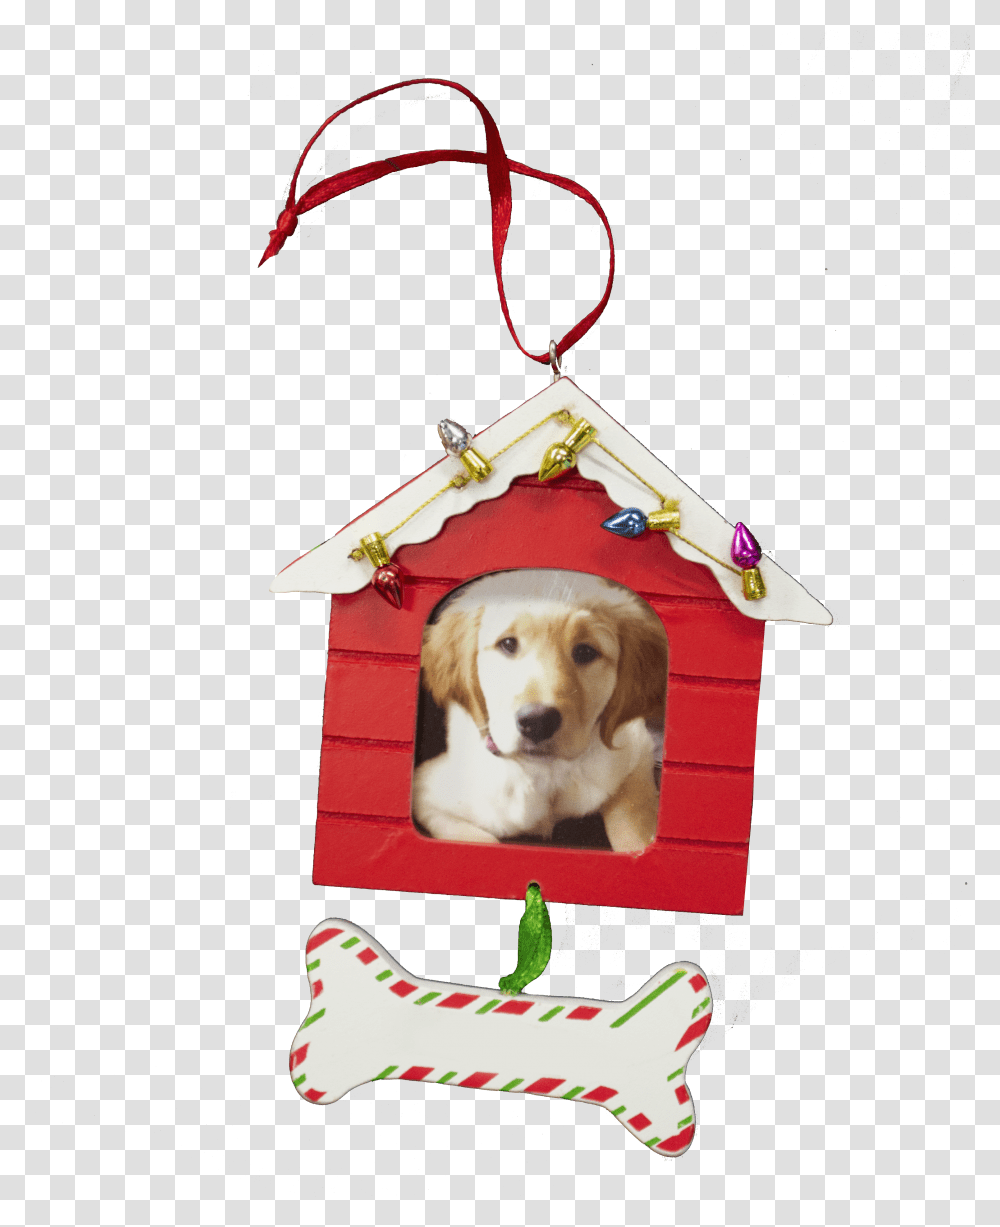 Doghouse Ornament Red Candy Cane Transparent Png